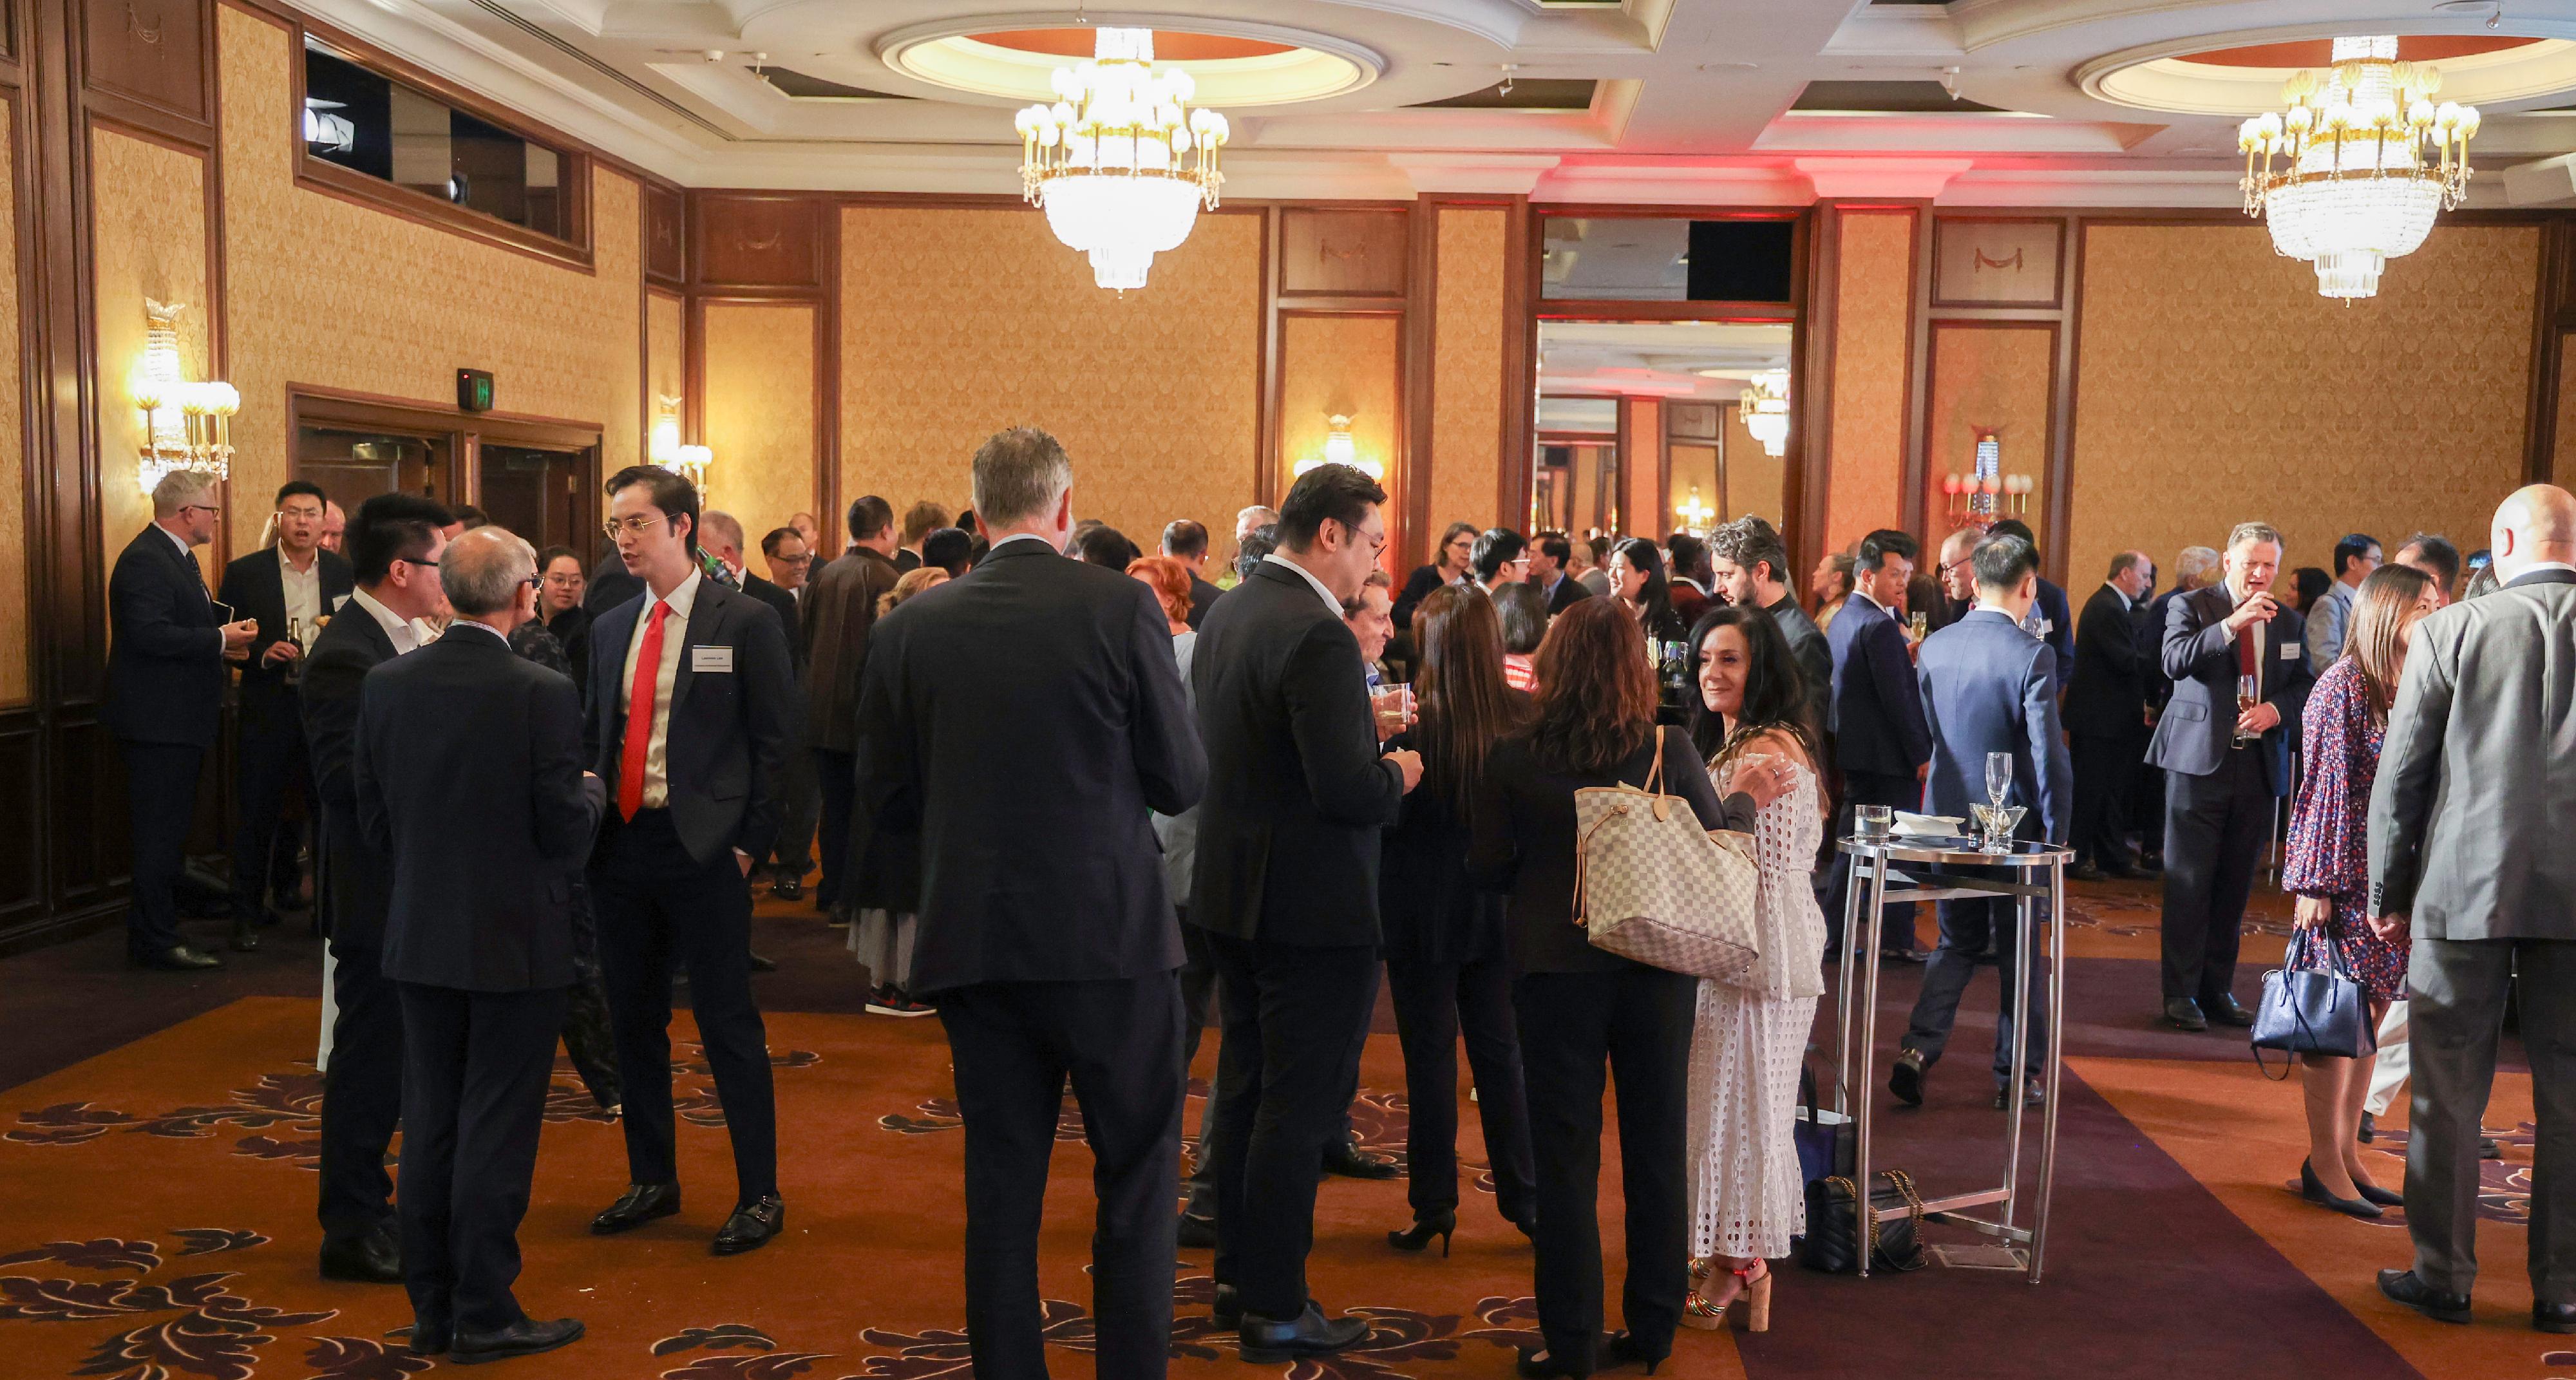 The Hong Kong Economic and Trade Office, Sydney hosted a reception in Melbourne, Australia, yesterday (February 15) to celebrate Chinese New Year. More than 150 guests from various sectors including political and business circles, media, academic and community groups as well as government representatives attended the reception.